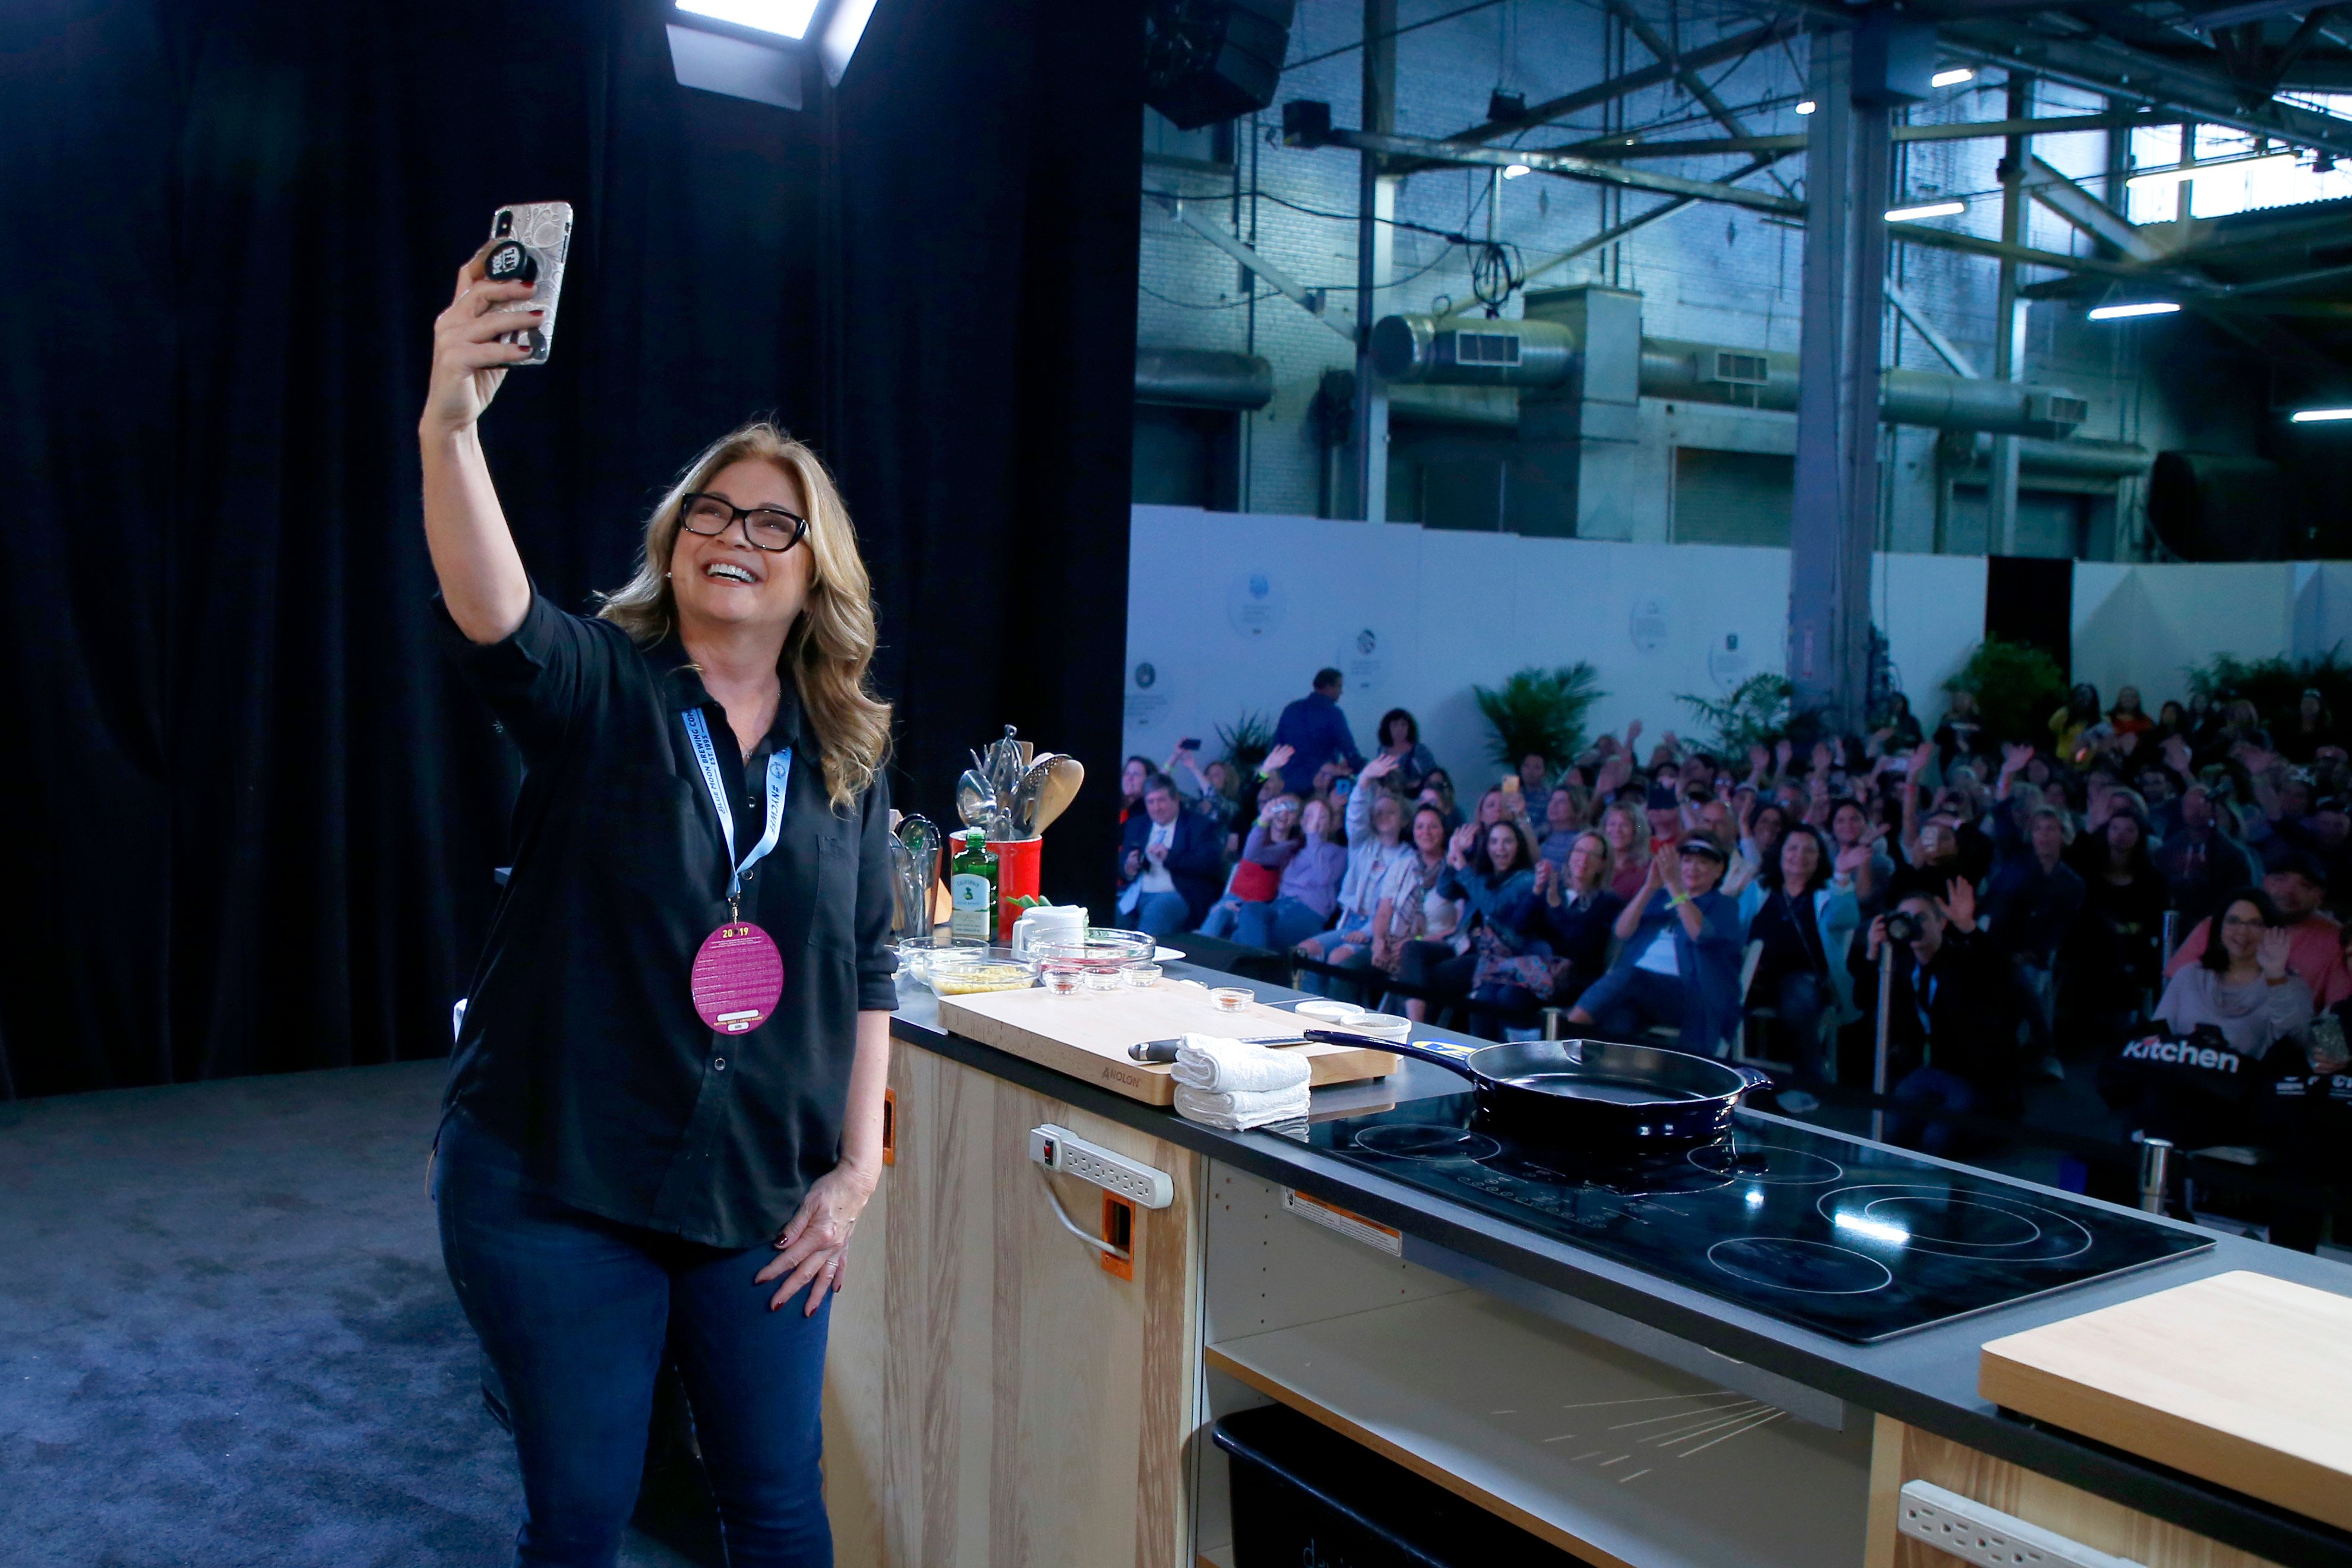 Valerie Bertinelli takes a selfie with fans at a 2019 Food Network/Cooking Channel event.